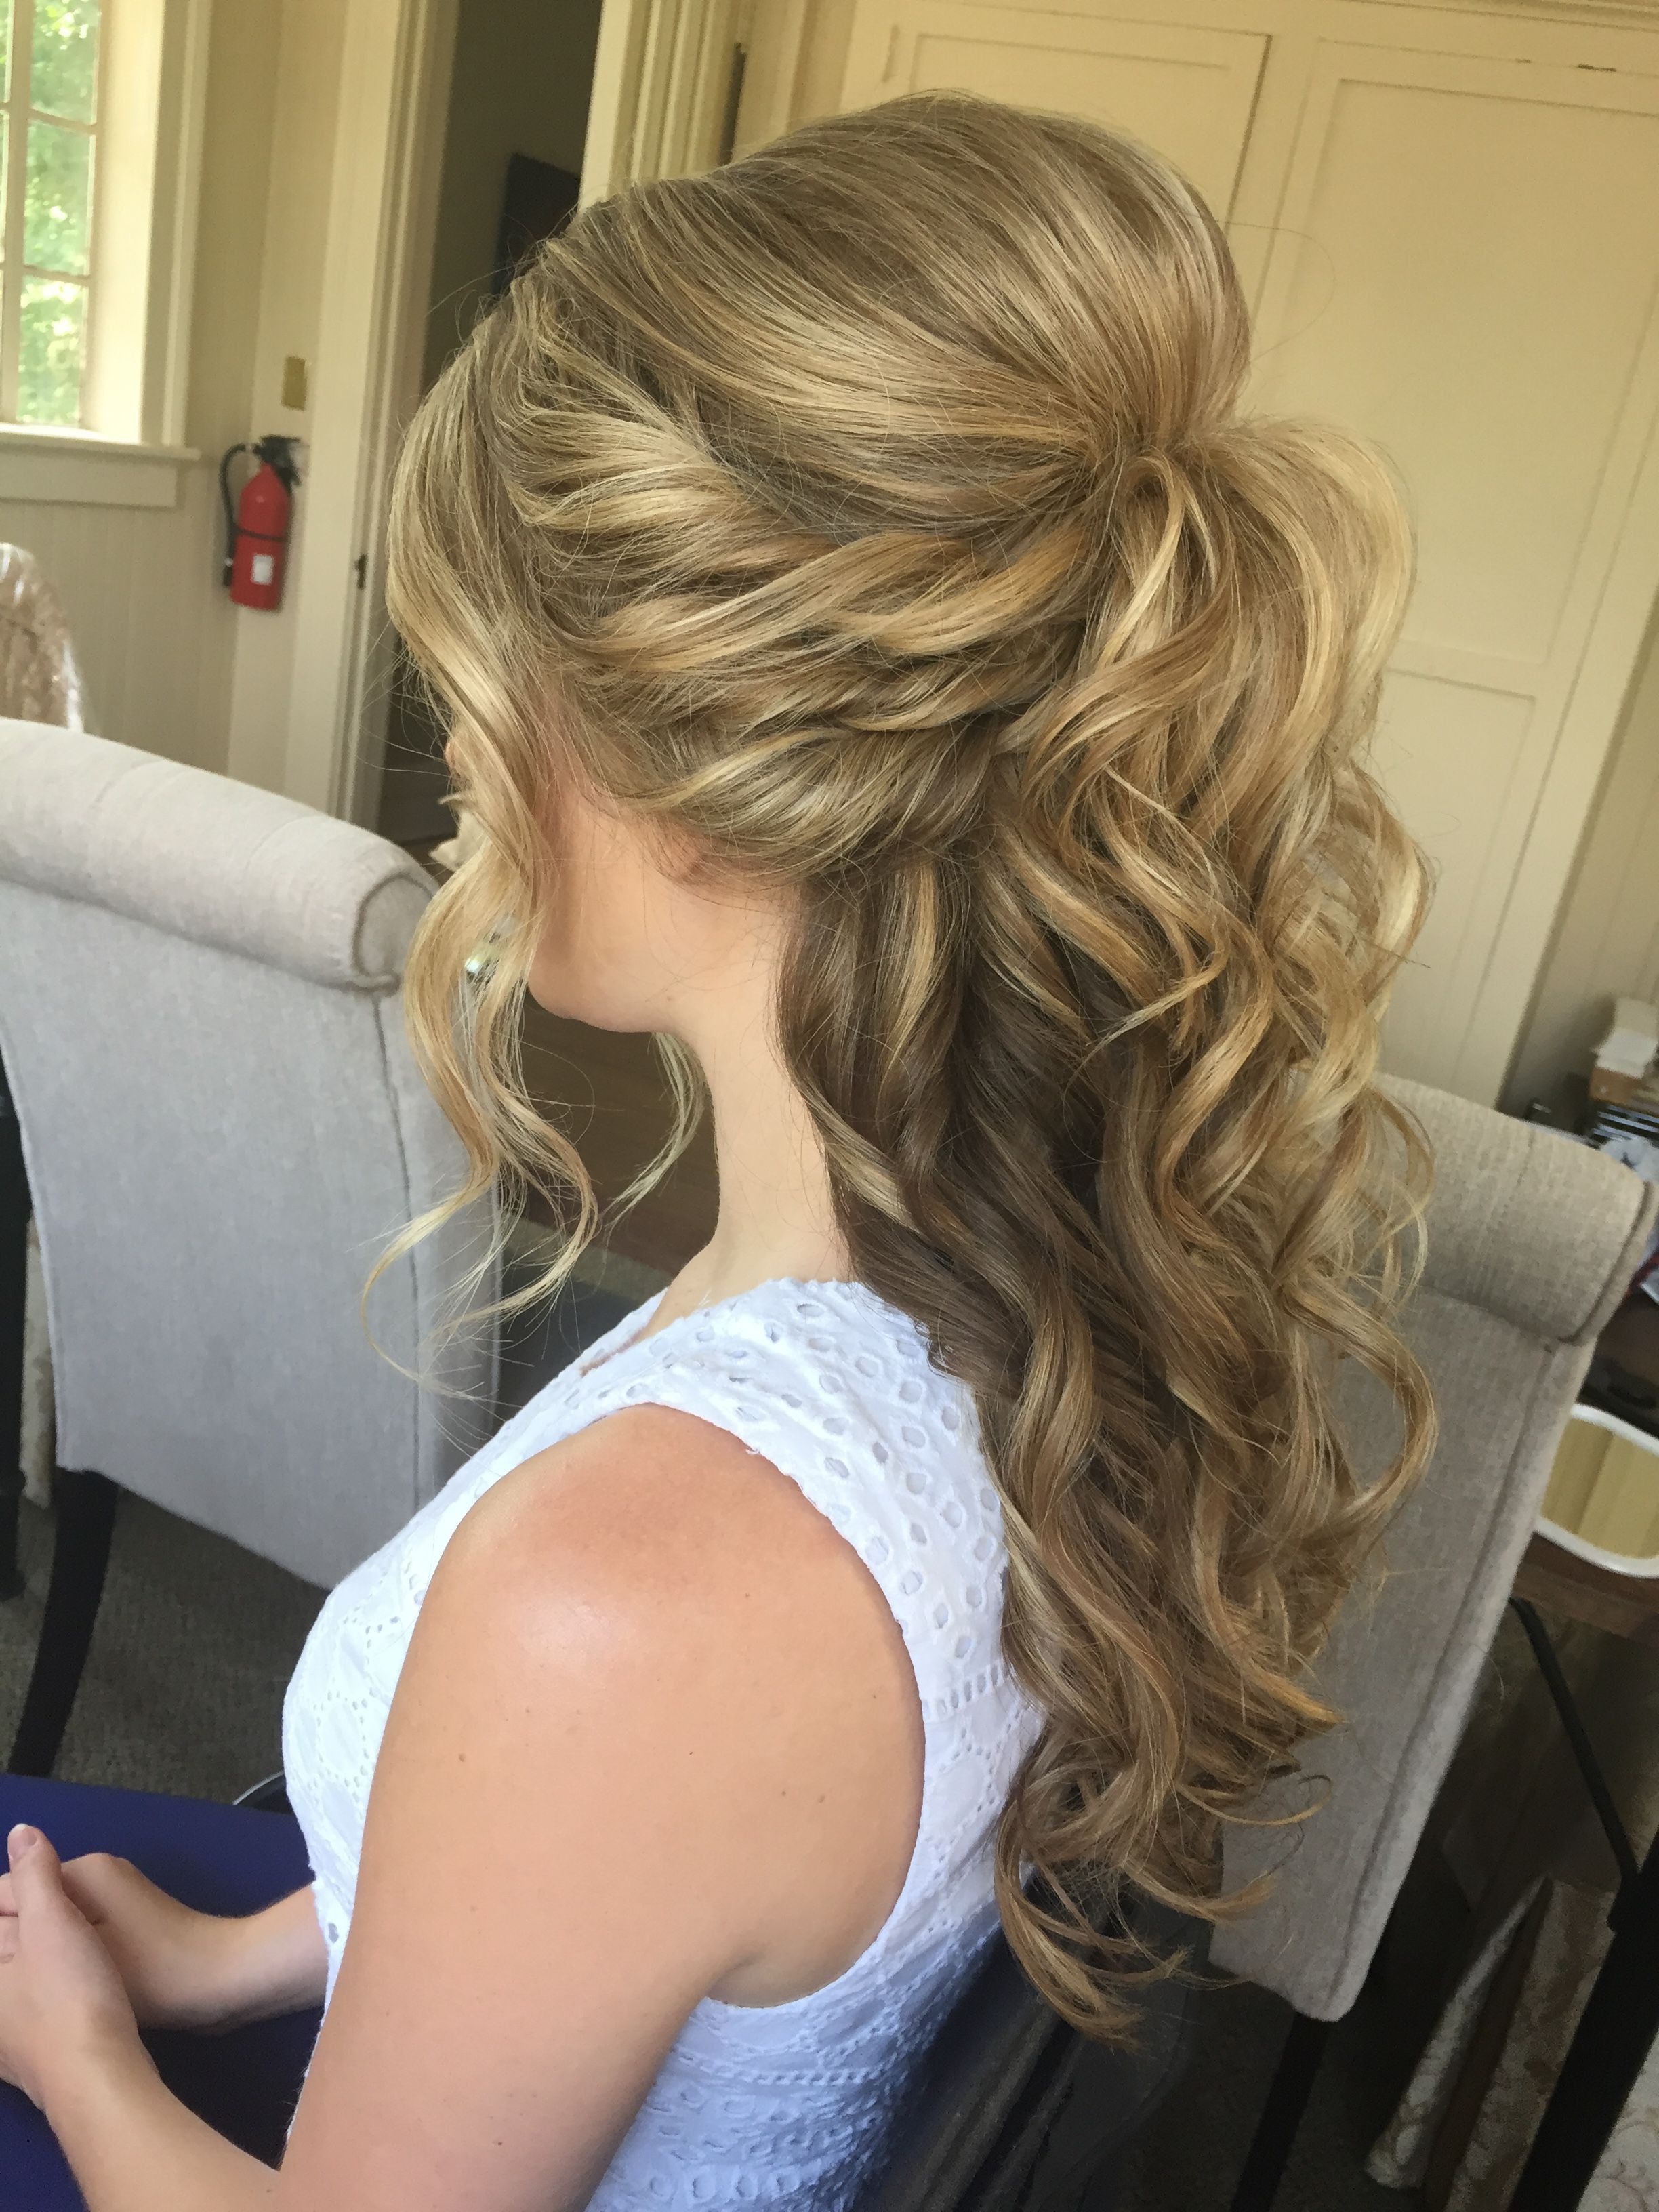 Most Up To Date Curly Prom Prom Hairstyles Regarding Fashion : Hairstyle Half Up Half Down Curly Surprising Curly Prom (View 8 of 20)